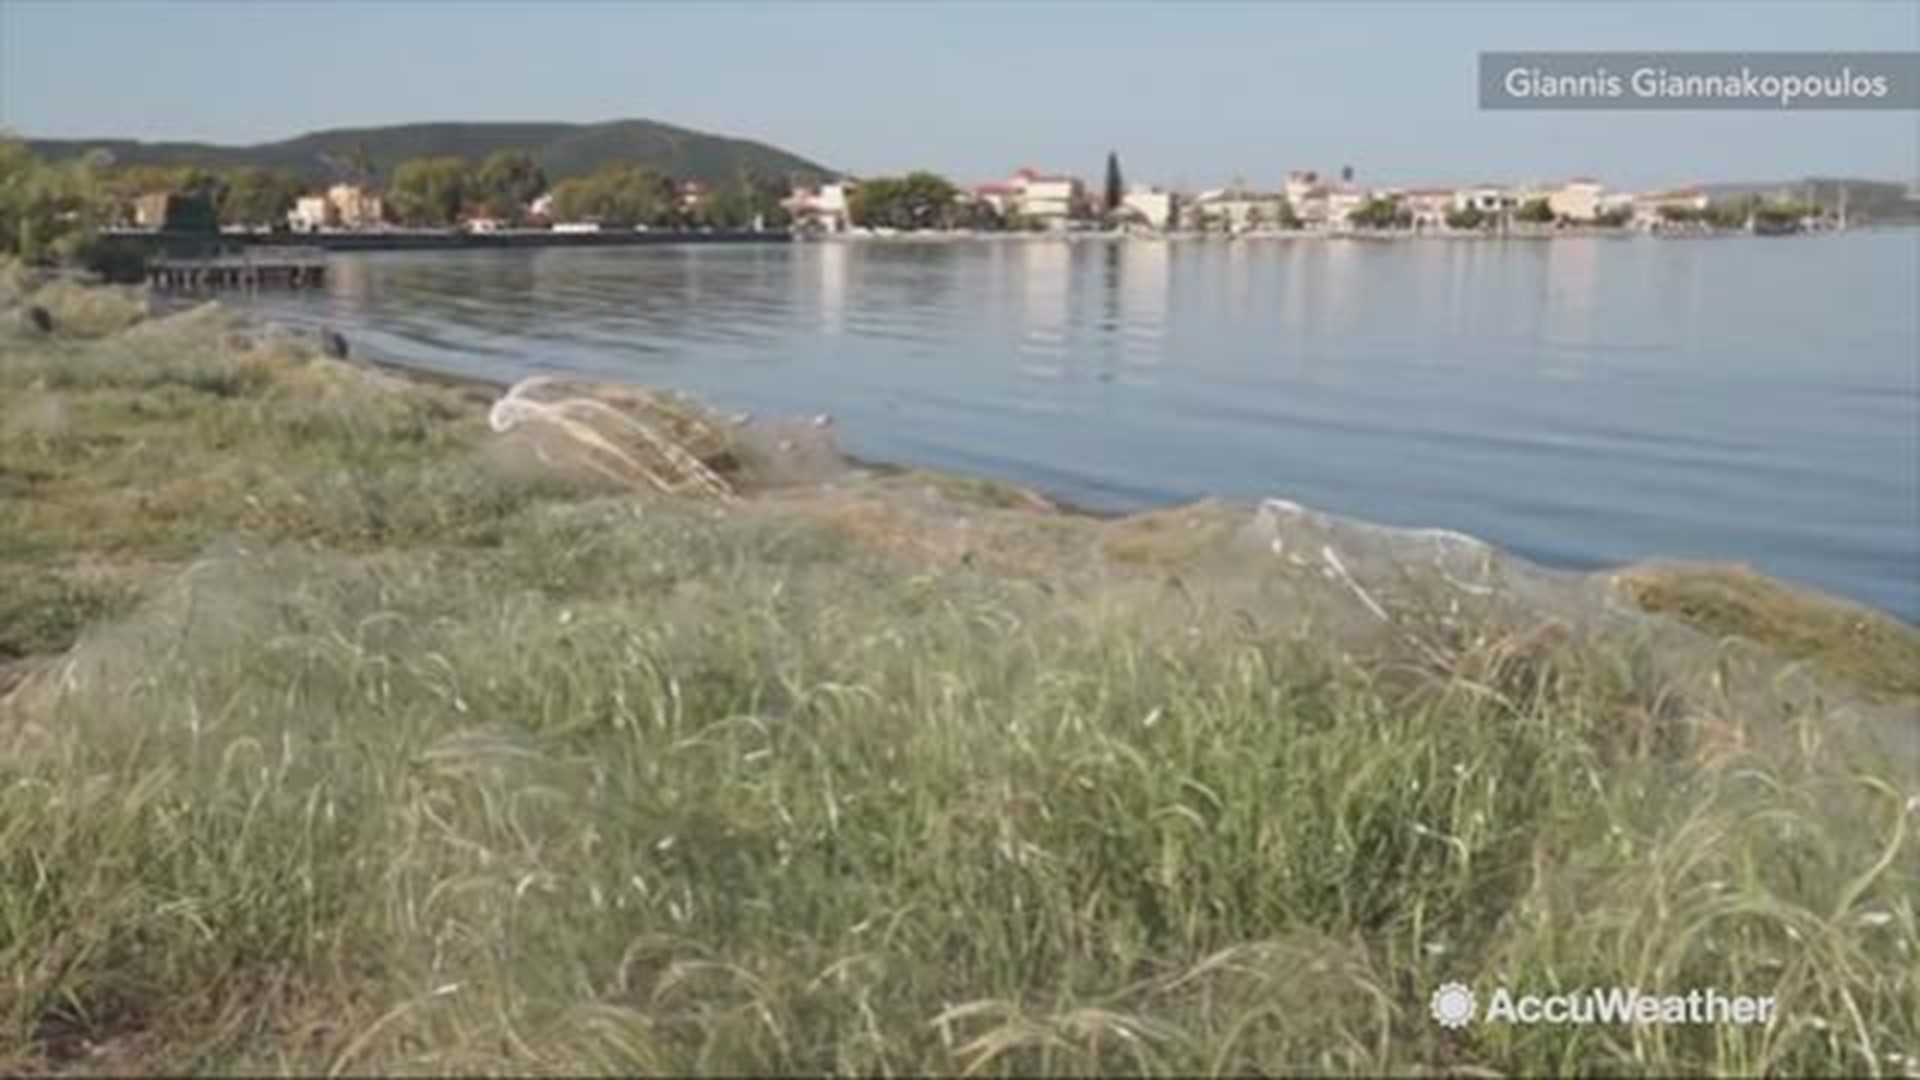 The Greek coastline in the town of Aitoliko was covered completely by spider webs.  The webs covered about 1000 feet of coastline.  It is believed that weather conditions were suitable for a population surge of mosquitoes, which are a source of food for s